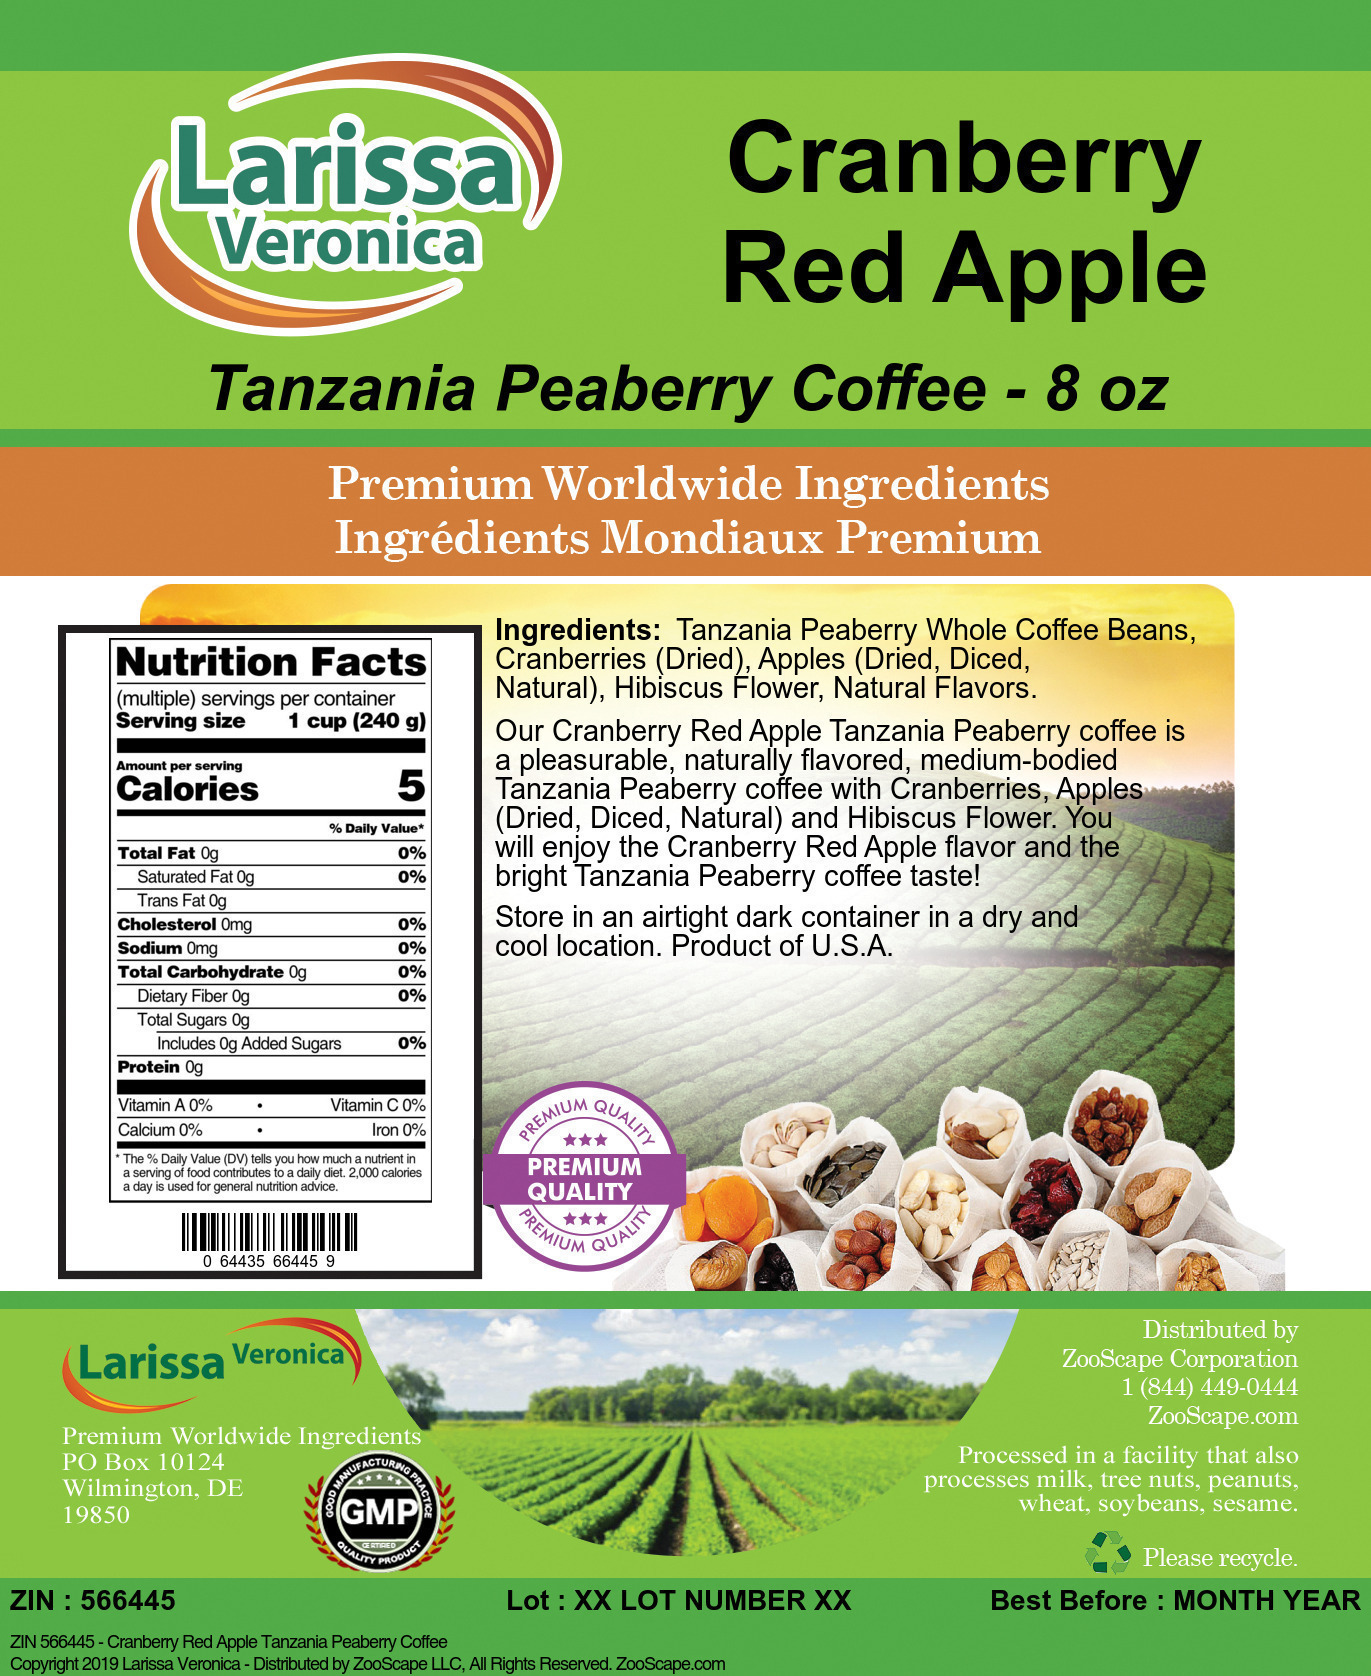 Cranberry Red Apple Tanzania Peaberry Coffee - Label